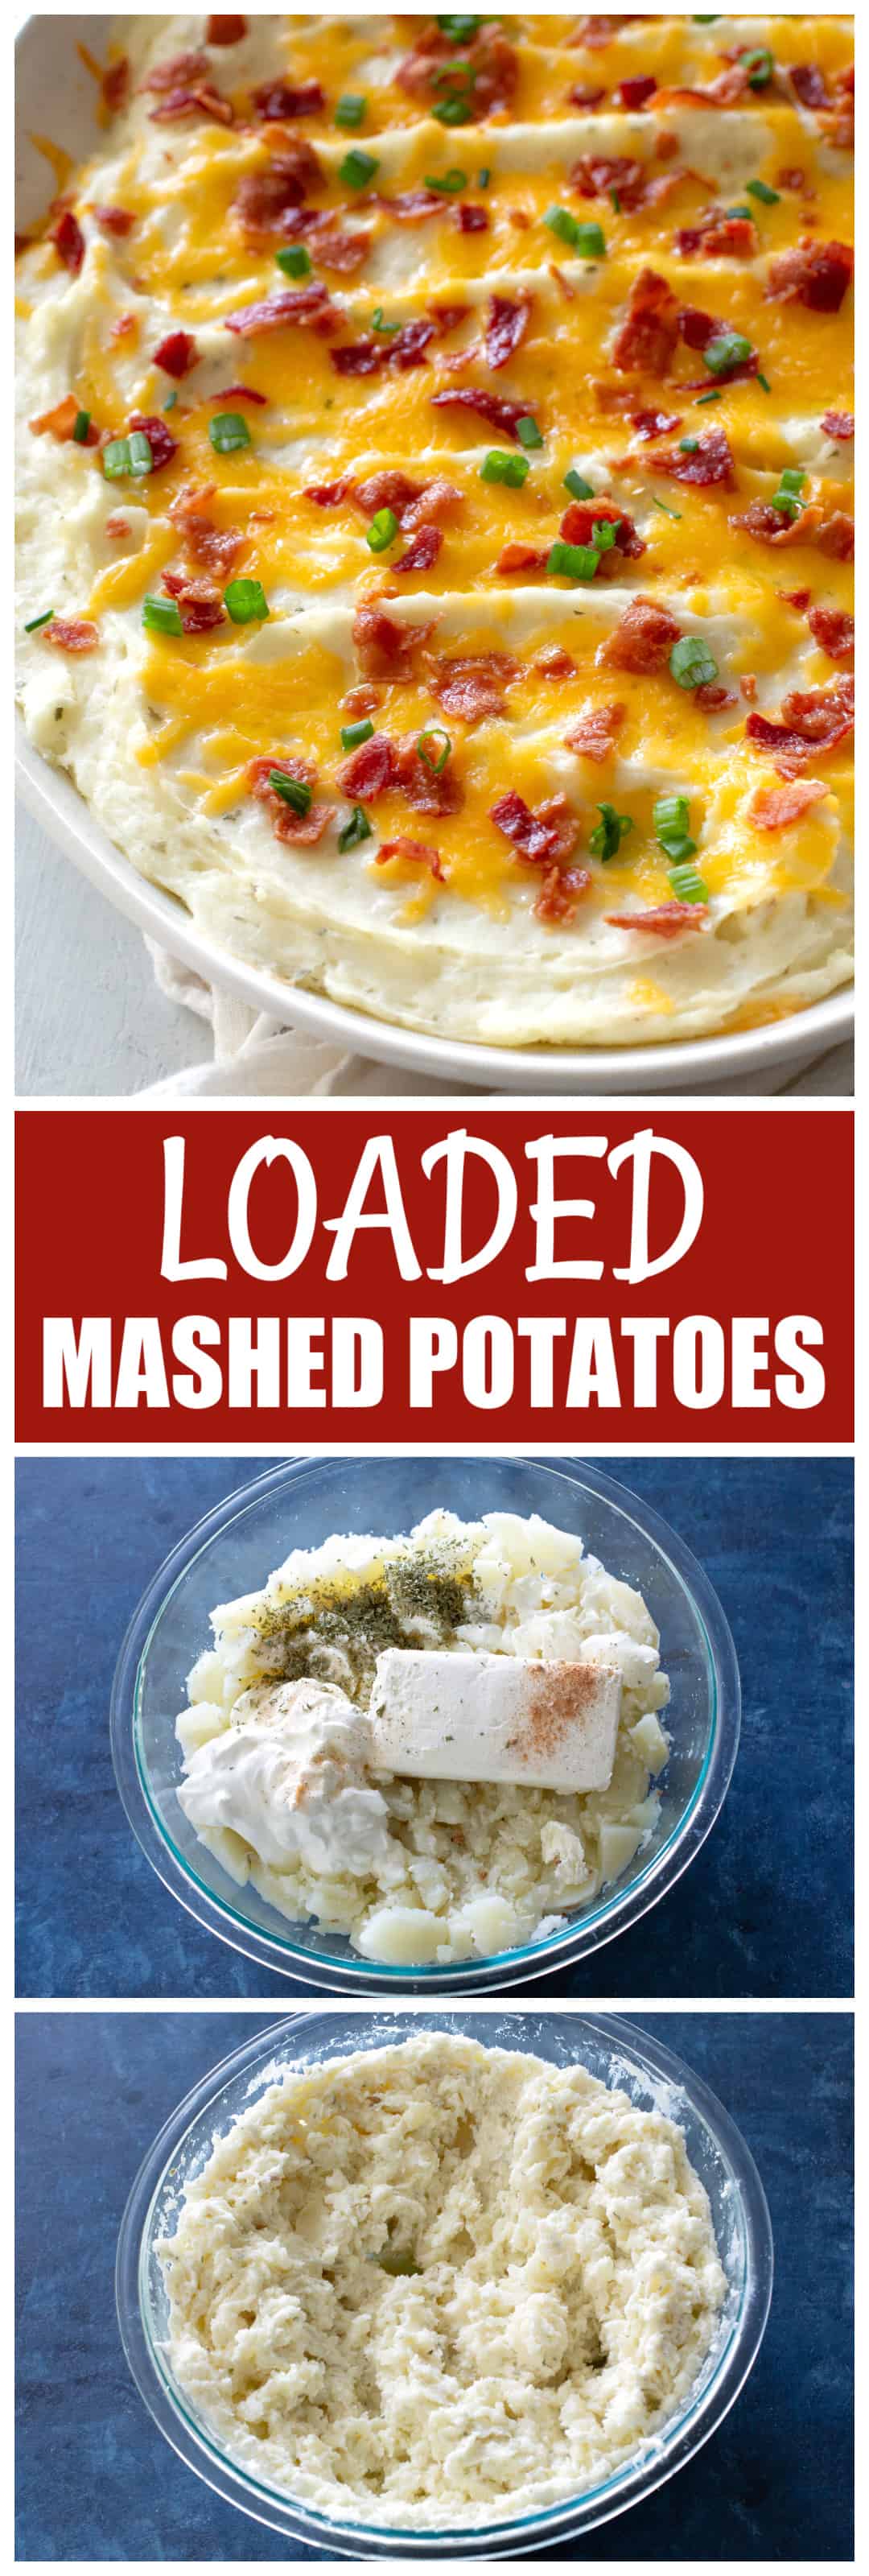 Loaded mashed potatoes - creamy and full of everything you would find in a baked potato. #loaded #mashed #potato #casserole #thanksgiving #easter #recipe #sidedish